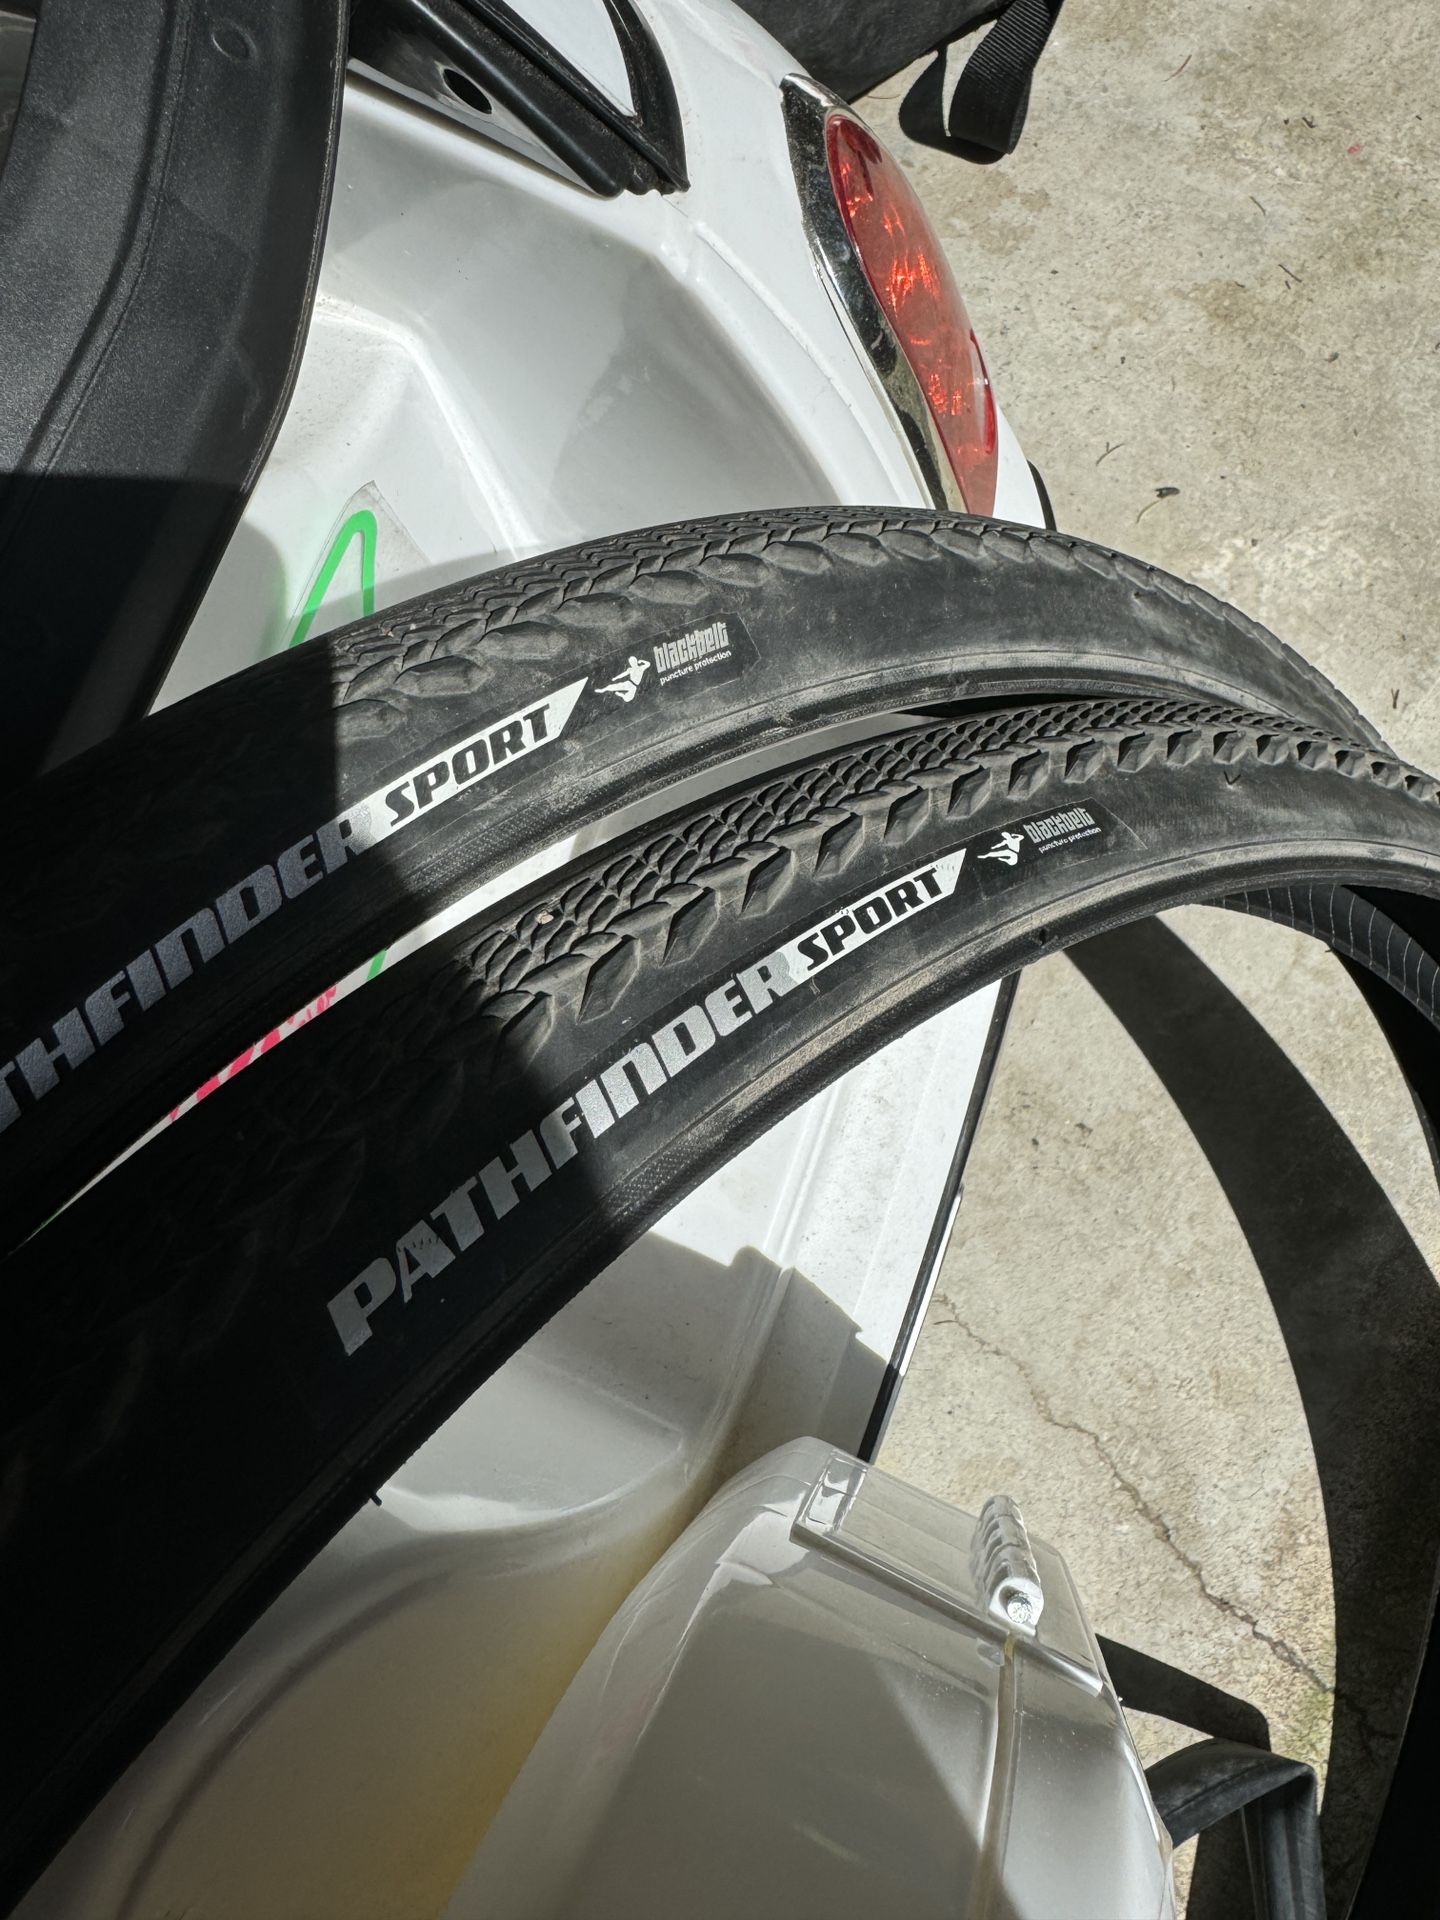 Specialized Pathfinder Sport Tires 700-38c And Tubes